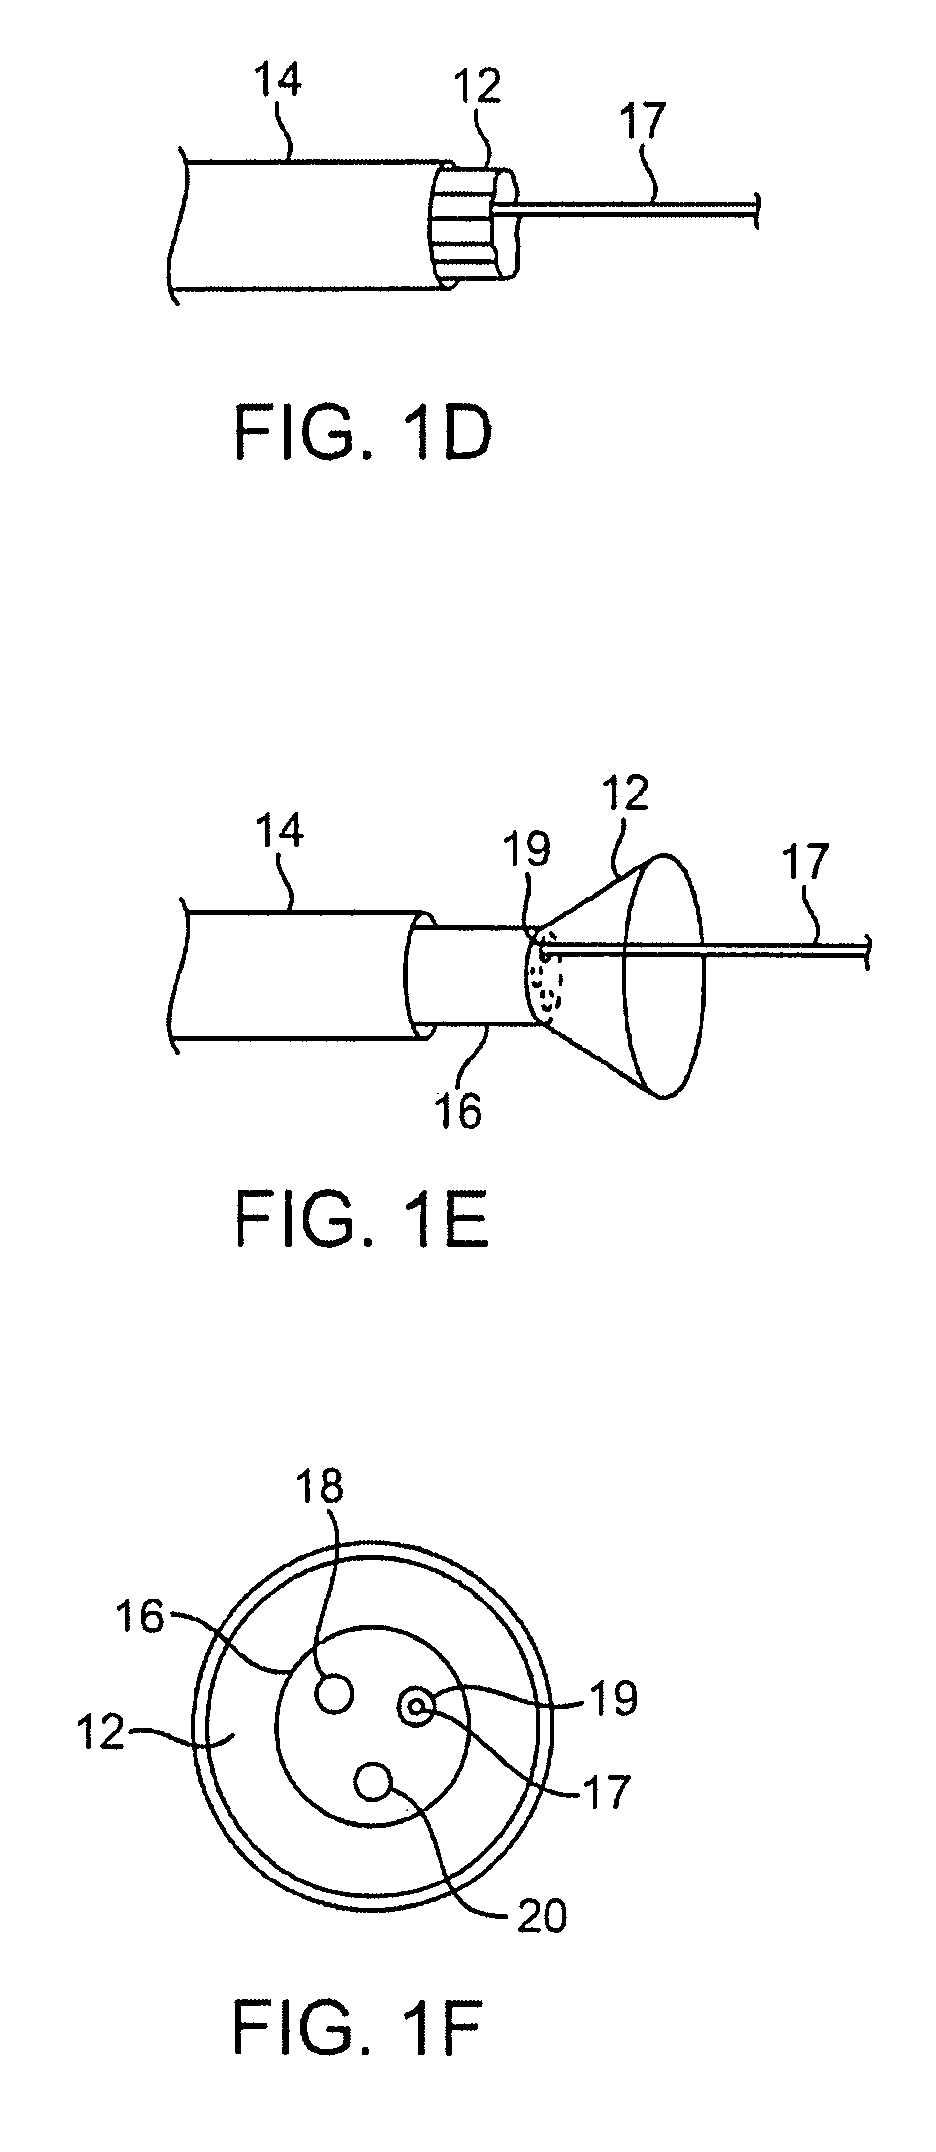 Visualization apparatus for transseptal access